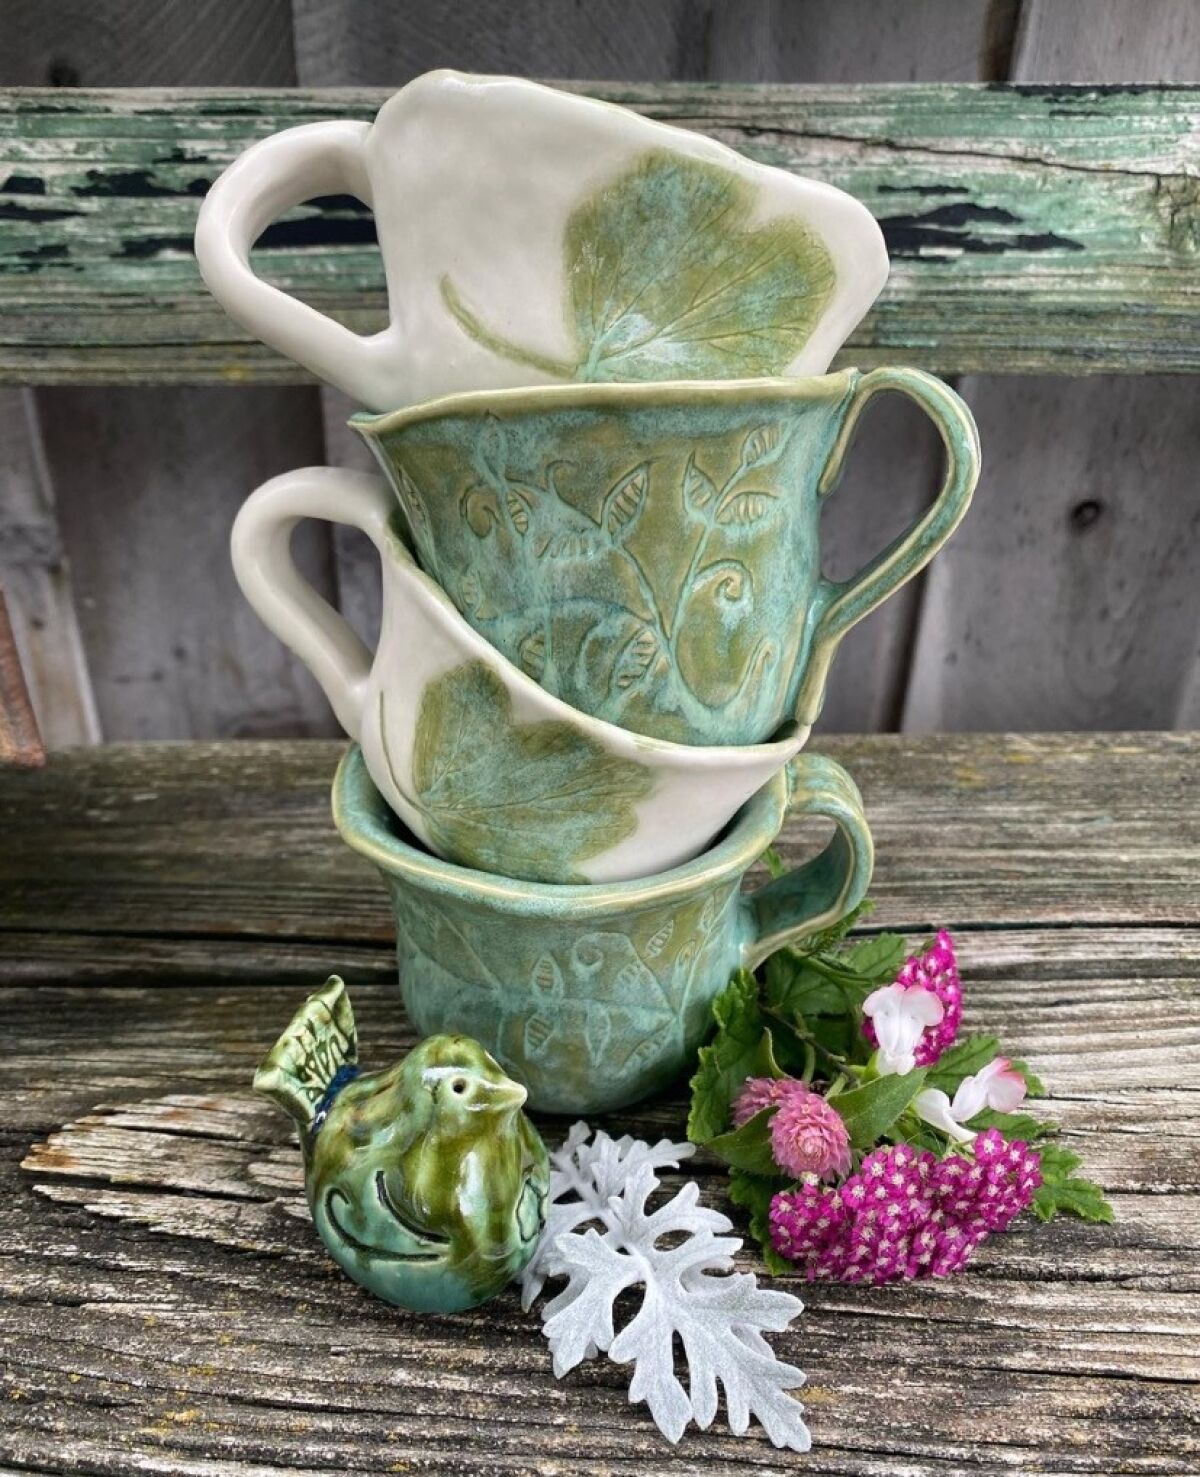 These mugs have flowers and herbs hand-pressed into them from the garden of vendor Sandra Lee of Petals and Pottery.